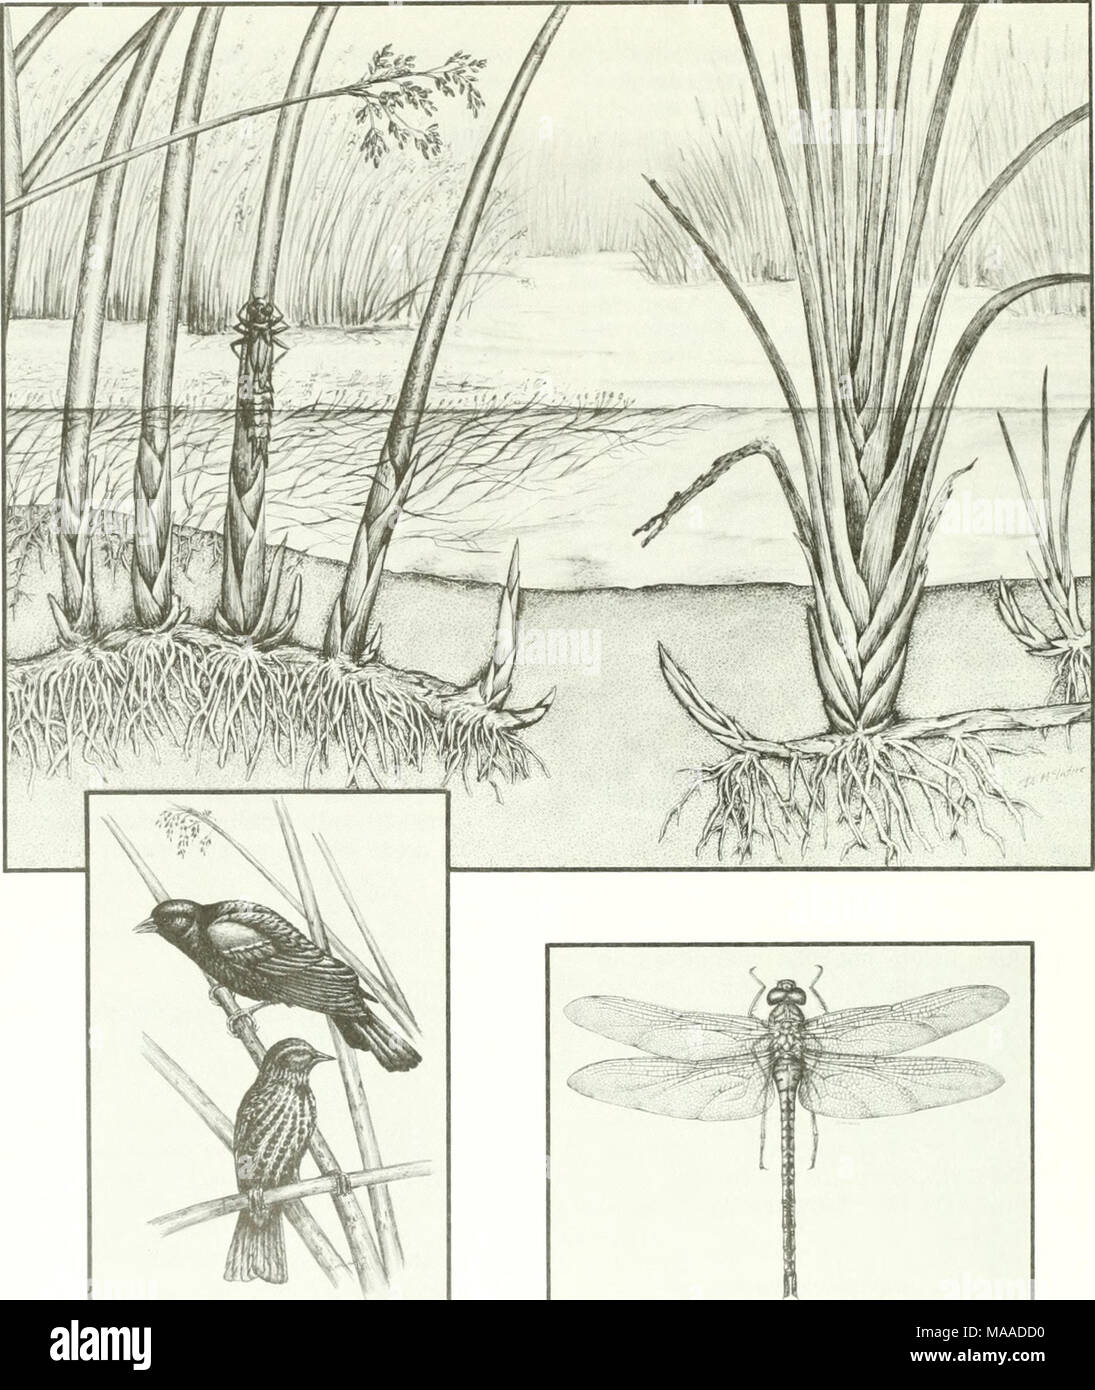 . The ecology of Tijuana Estuary, California : a national estuarine research reserve . Figure 3.15. Brackish marsh habitats support large emergents, including bulrushes (Scirpus californicus) and cattails (Typha domingensis), as well as the submerged aquatic, ditch grass (Ruppia maritima). Dragonfly nymphs (on the bulrush stem) are adults, such as the green darner (Anax Junius; Odonata: Aeschnidae) are common. Red-winged blackbirds are characteristic residents of the emergent brackish marsh. Mclntire collection, © 1986 by Zedler. 42 Stock Photo